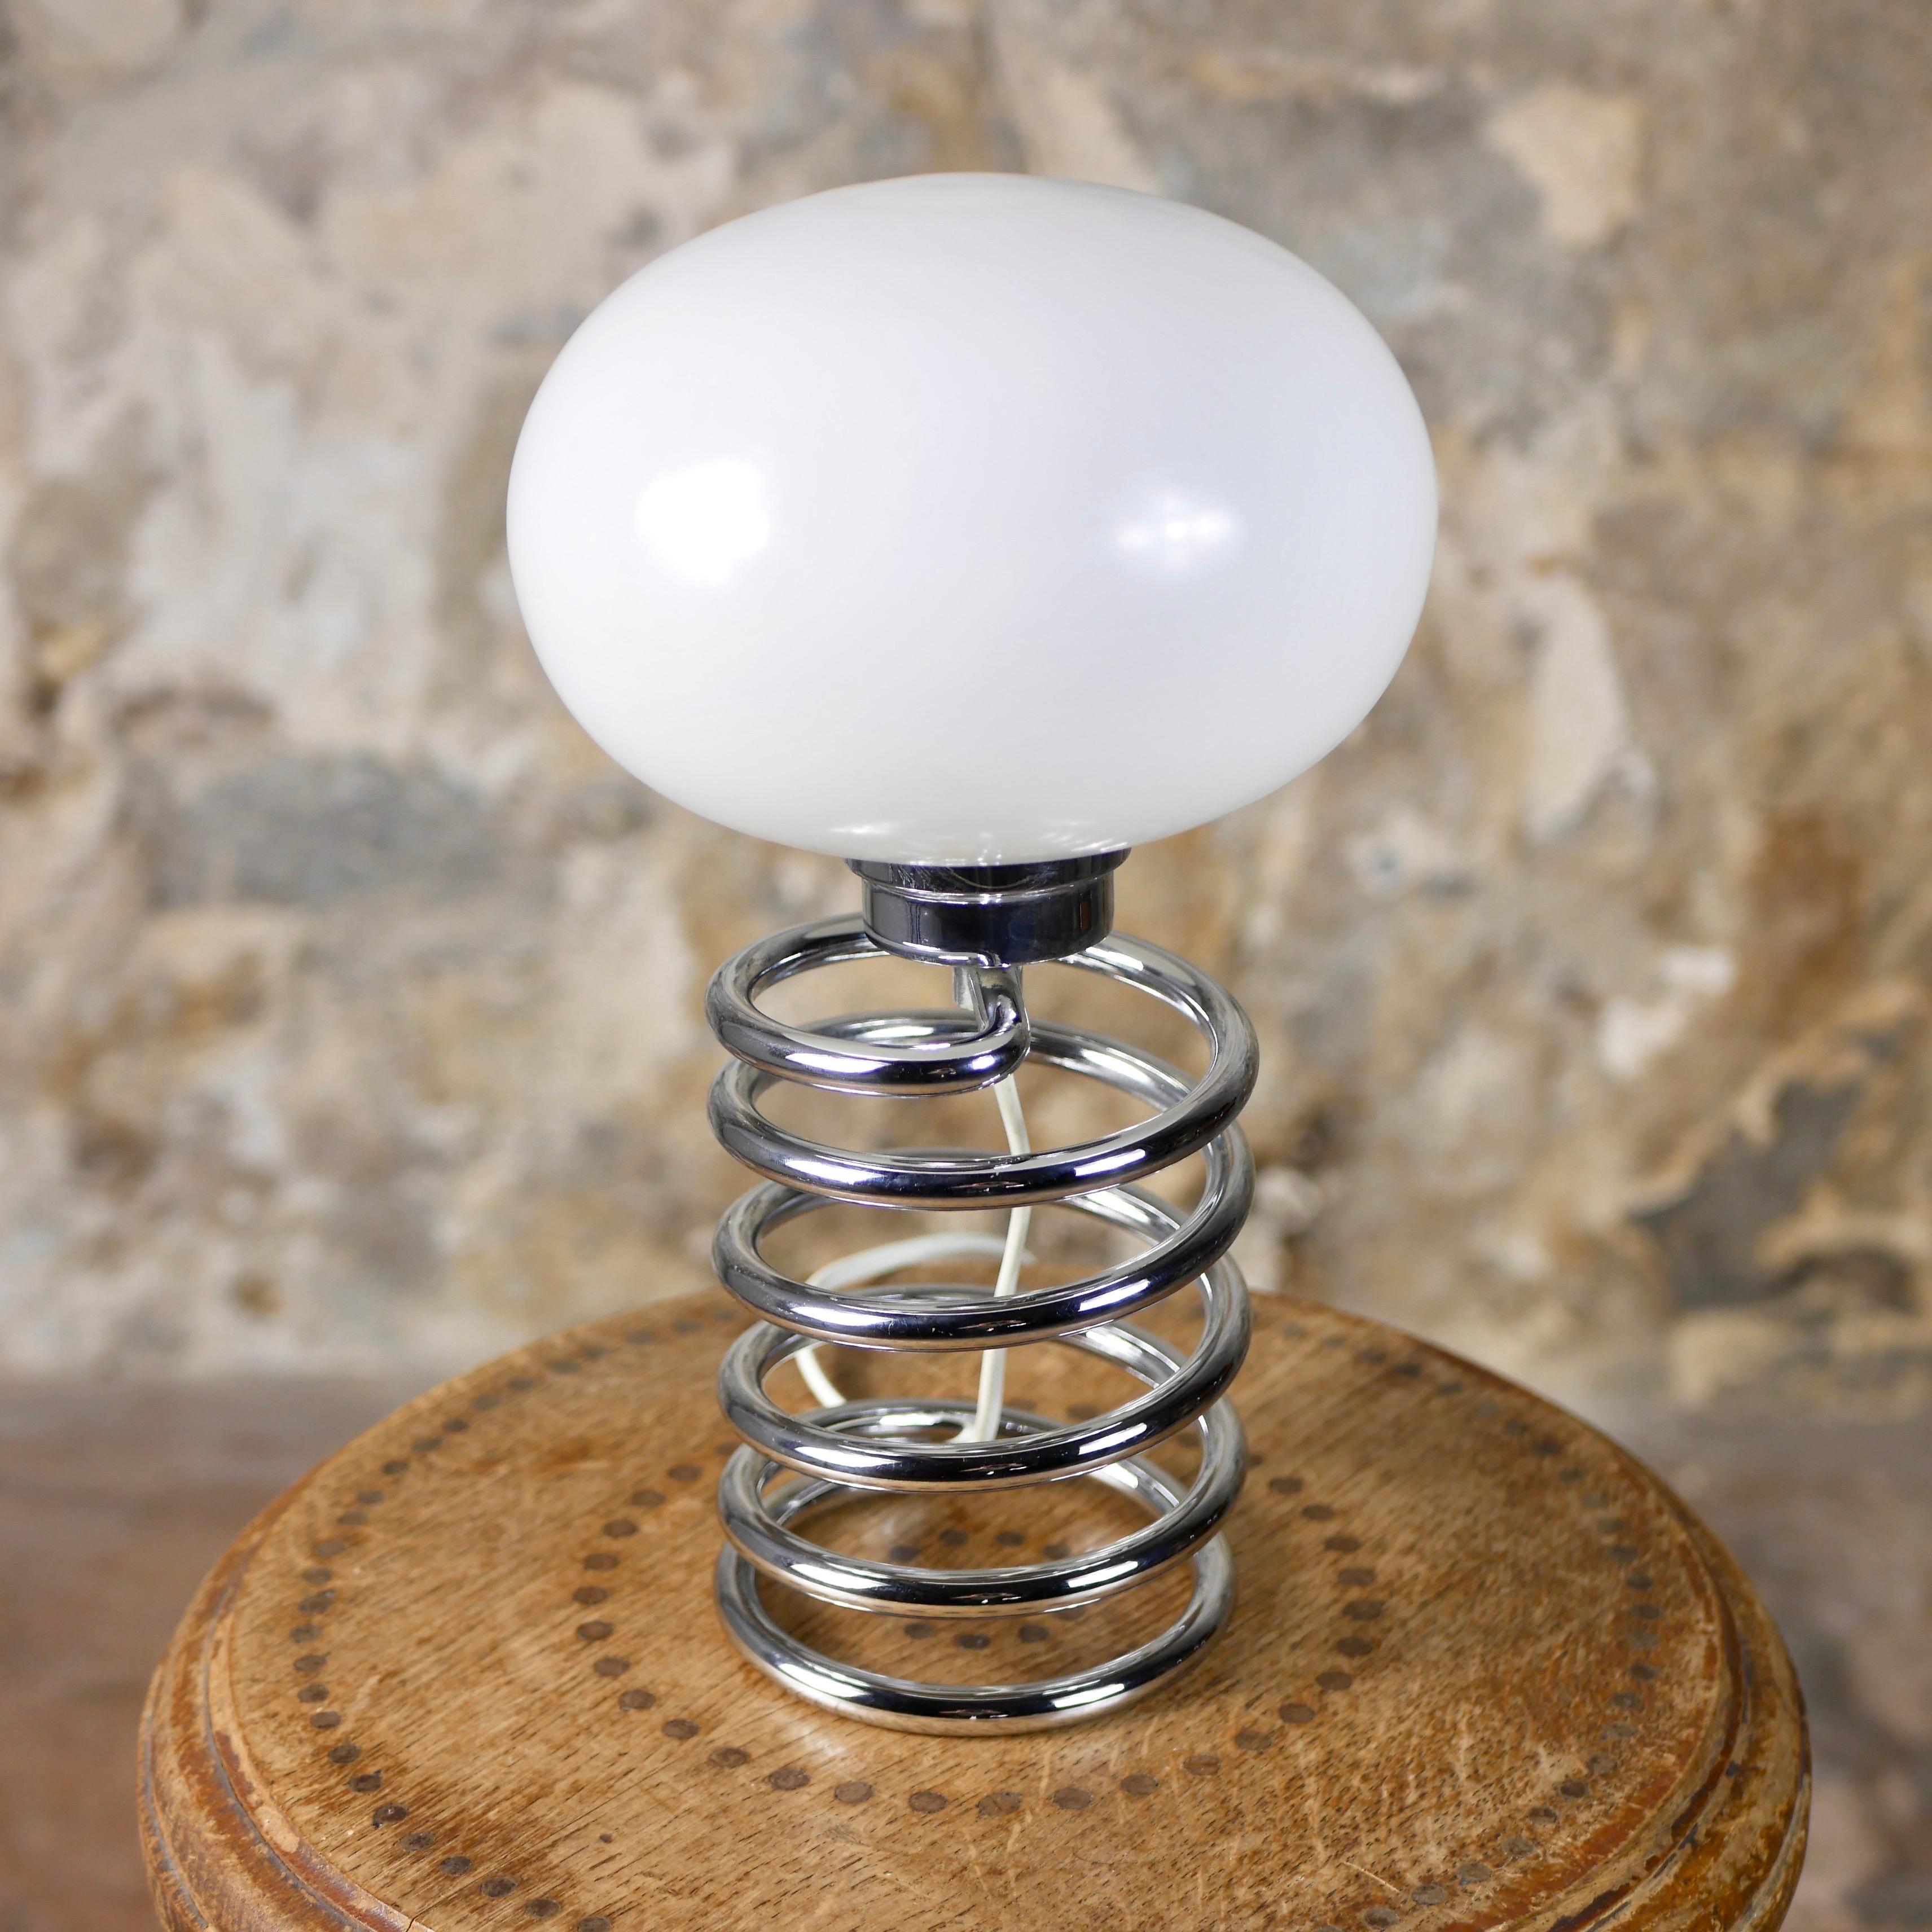 Space Age Spring table lamp « Spirale » by Ingo Maurer, made in Germany, 1965